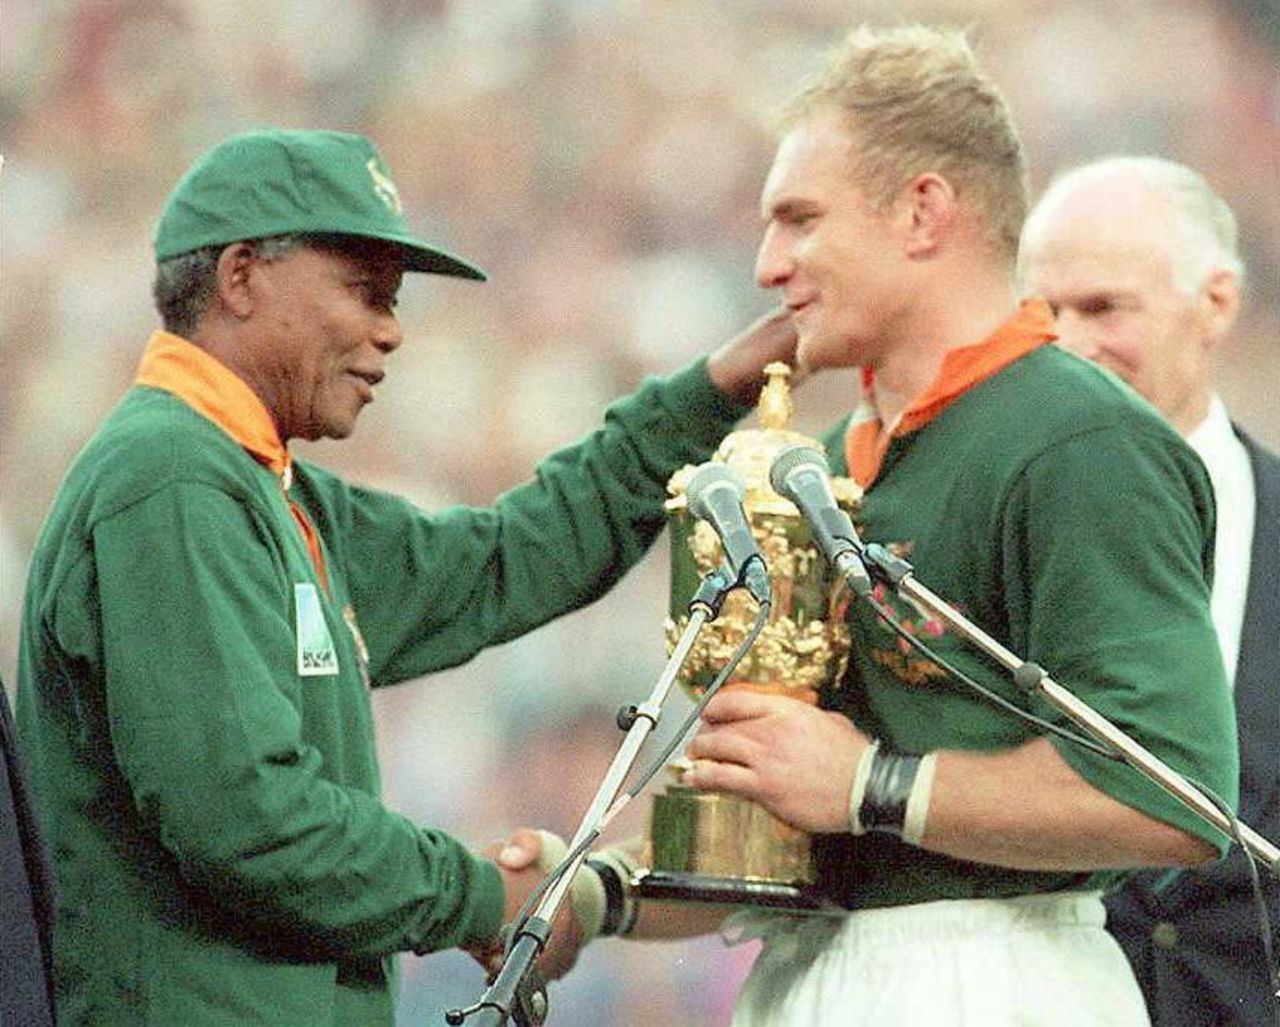 The image of South African captain Francois Pienaar receiving the World Cup trophy from President Nelson Mandela became iconic. The tournament inspired the Hollywood film "Invictus," with Matt Damon playing Pienaar.